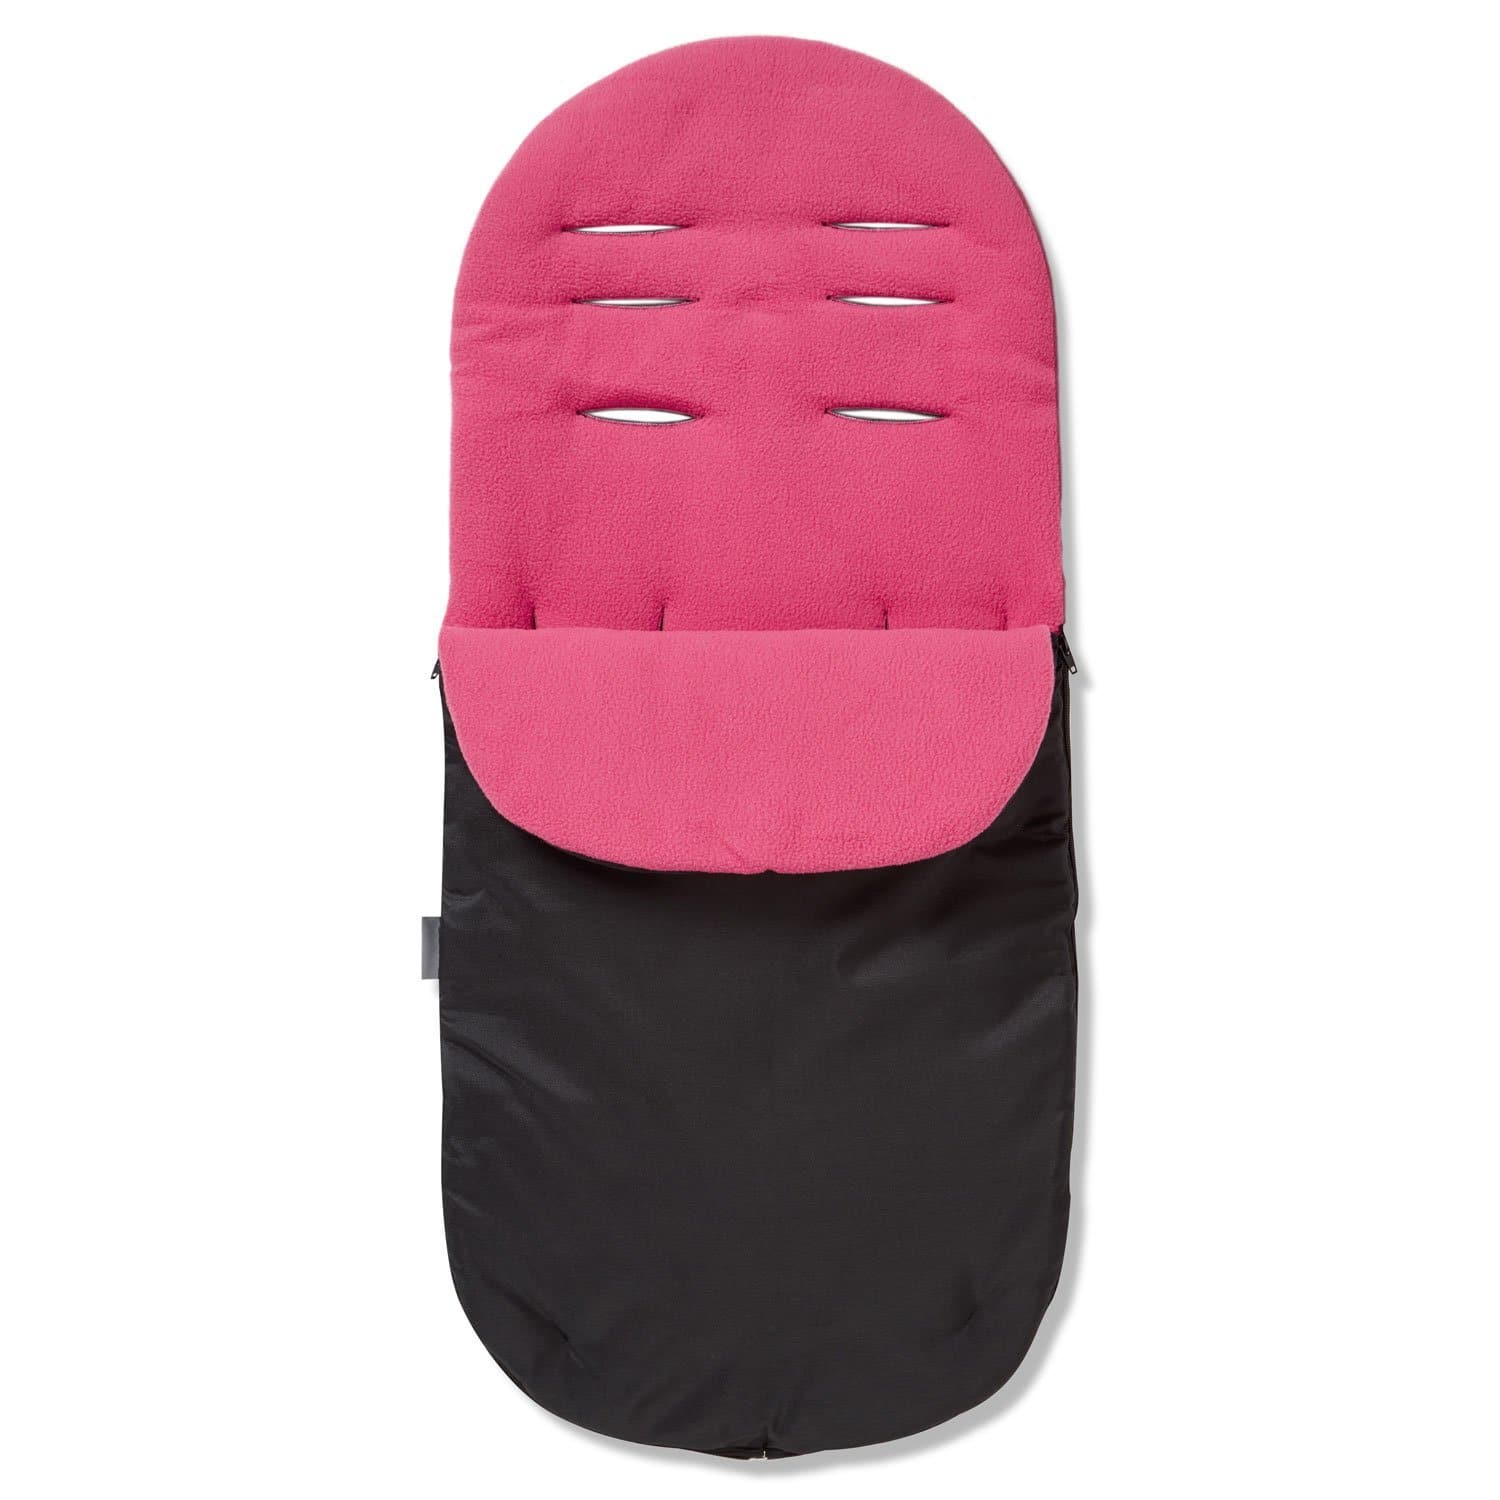 Footmuff / Cosy Toes Compatible with BabyCare - For Your Little One